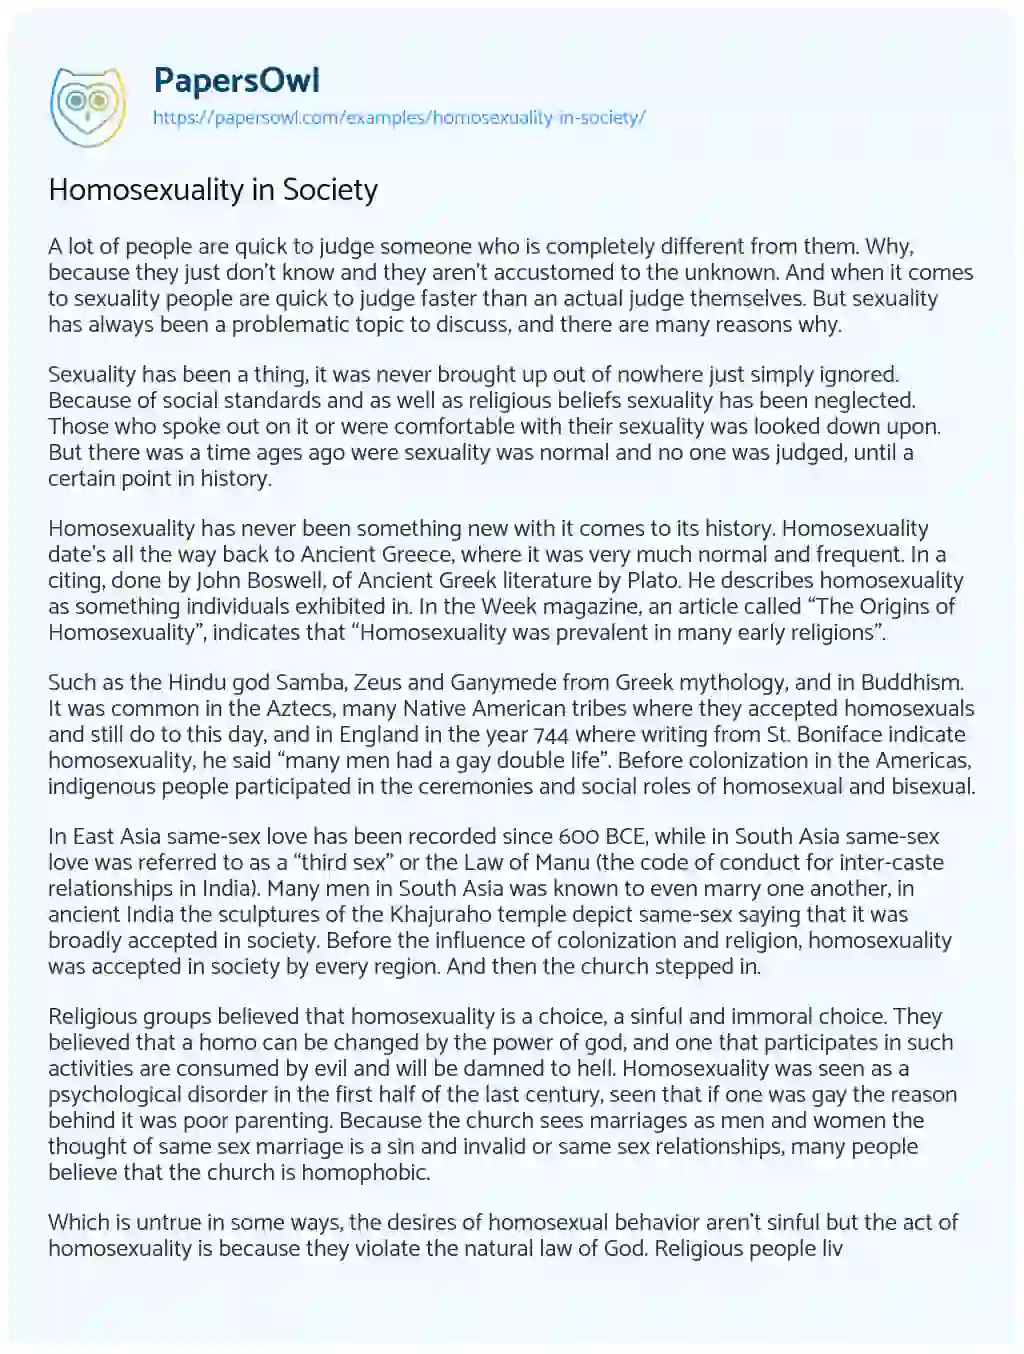 Essay on Homosexuality in Society